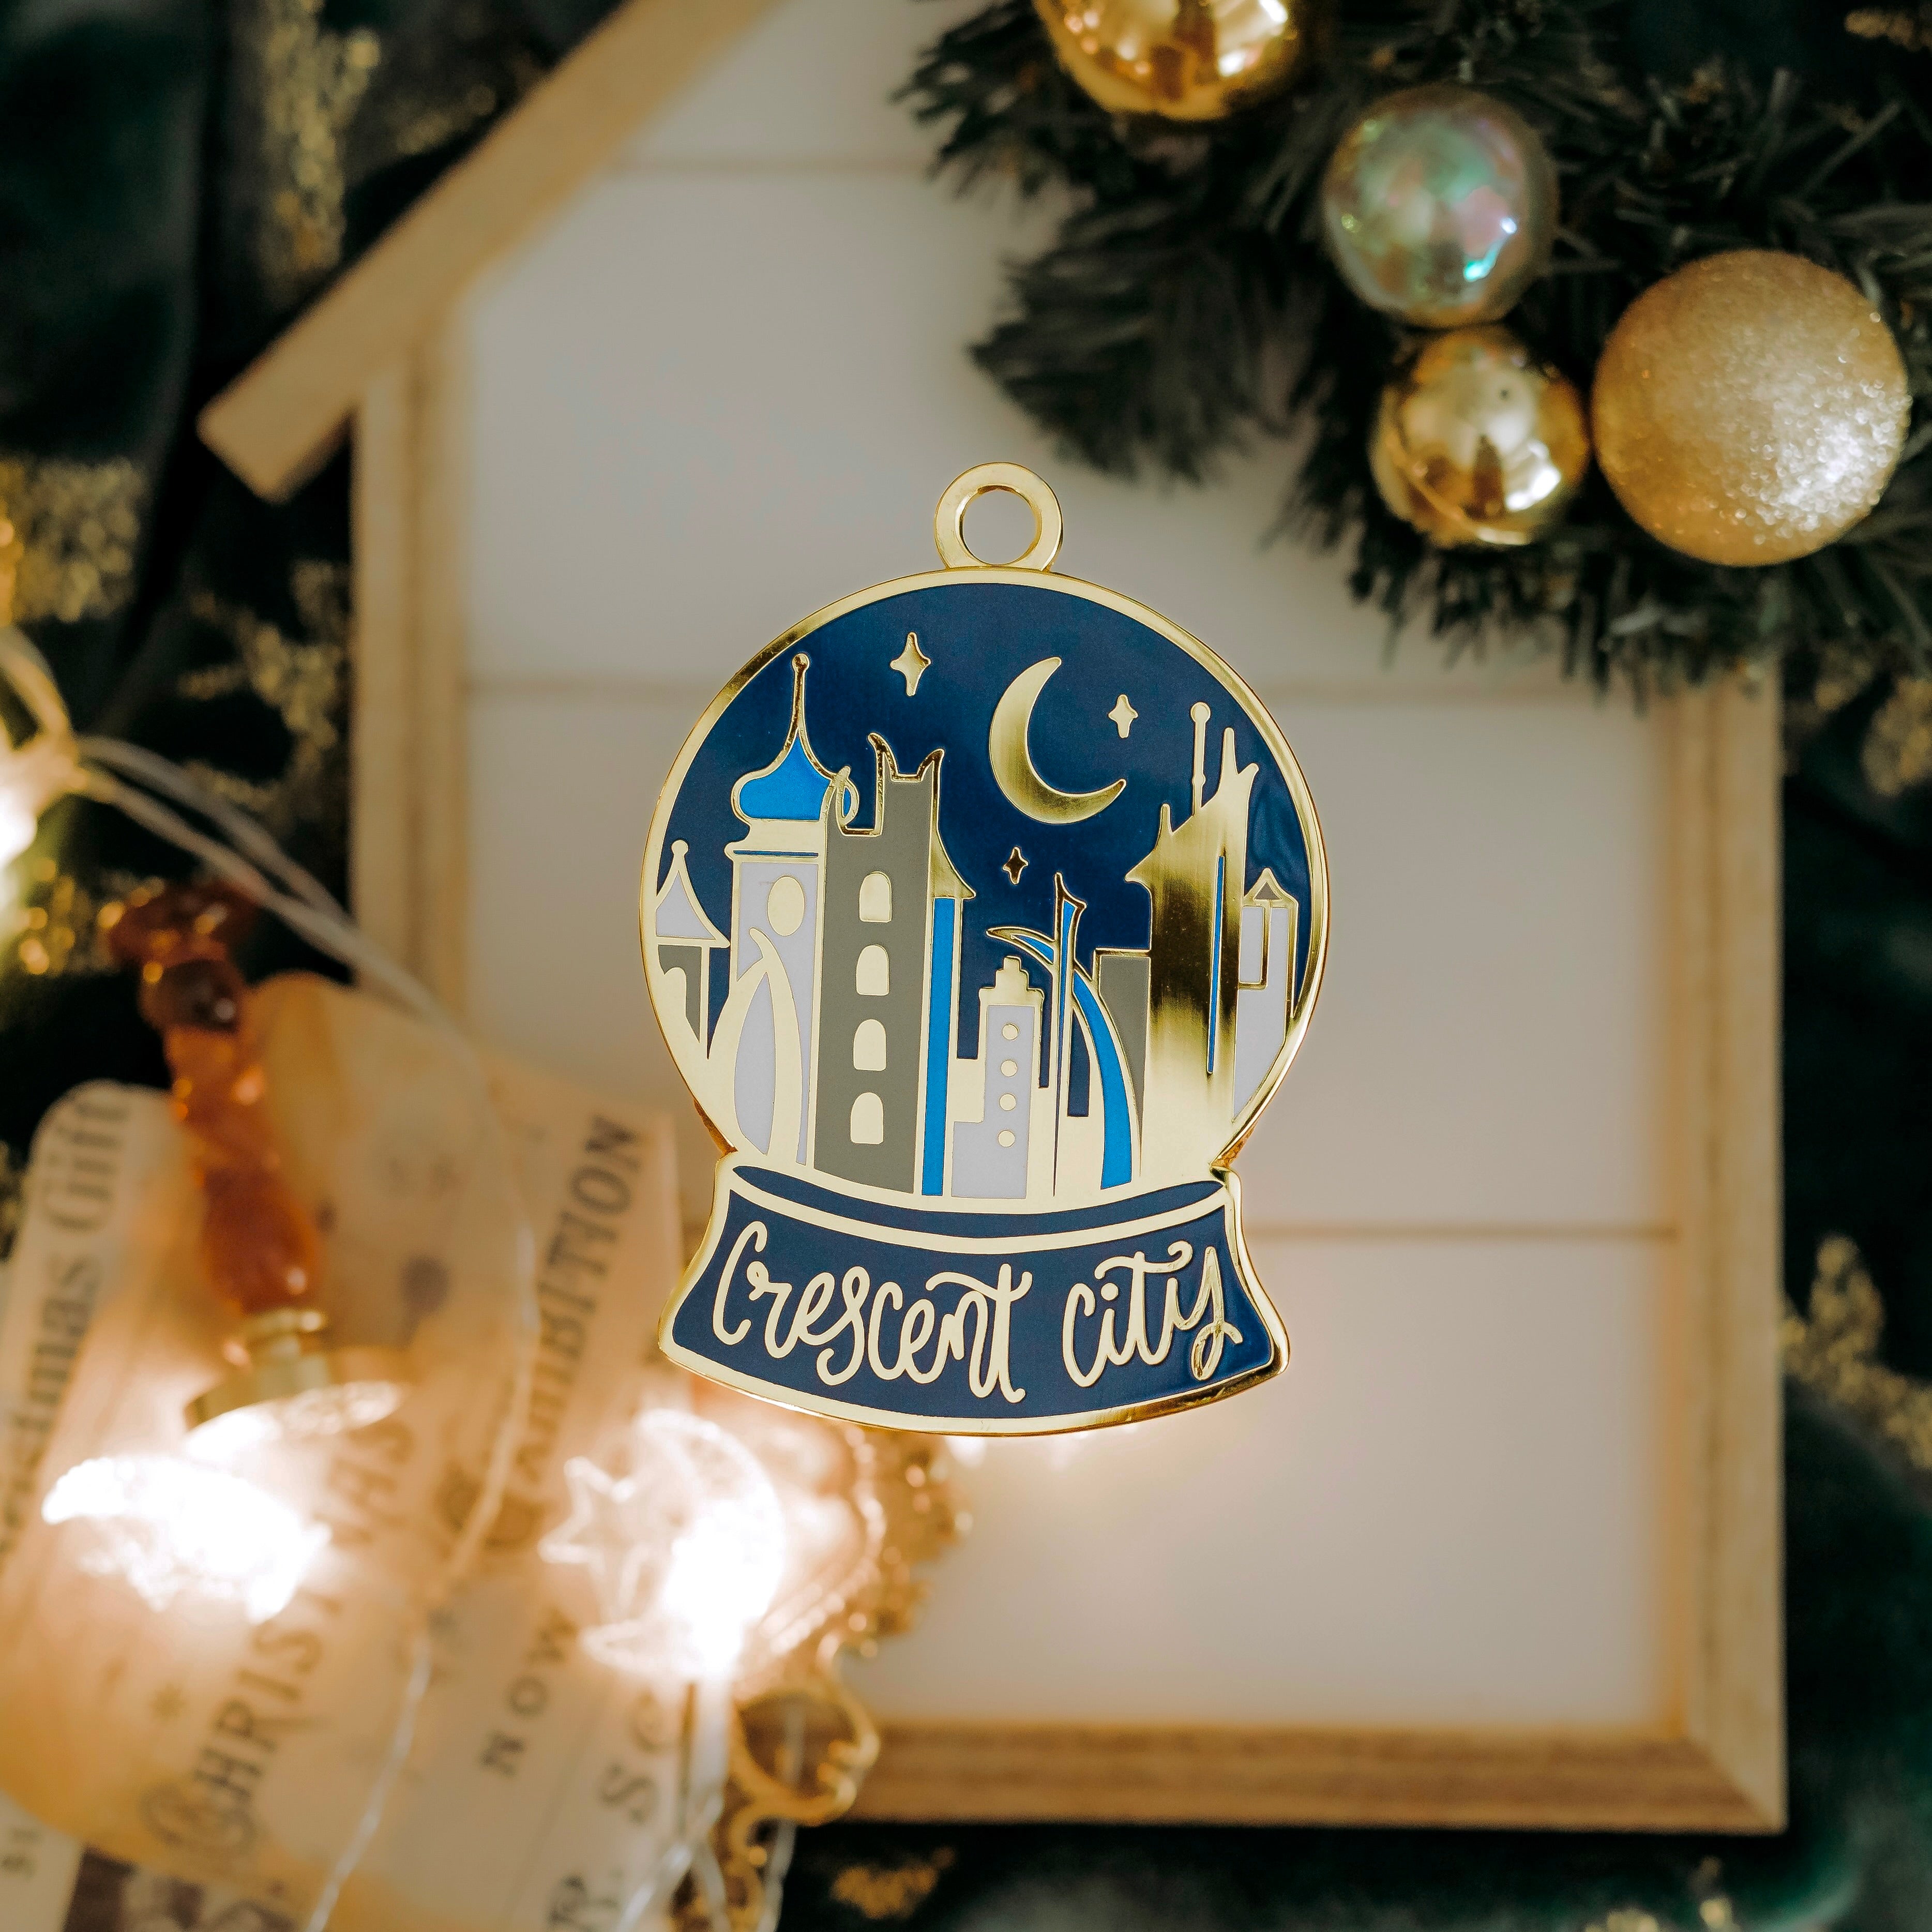 ICE! Globe LED Ornament - Gaylord Hotels Store